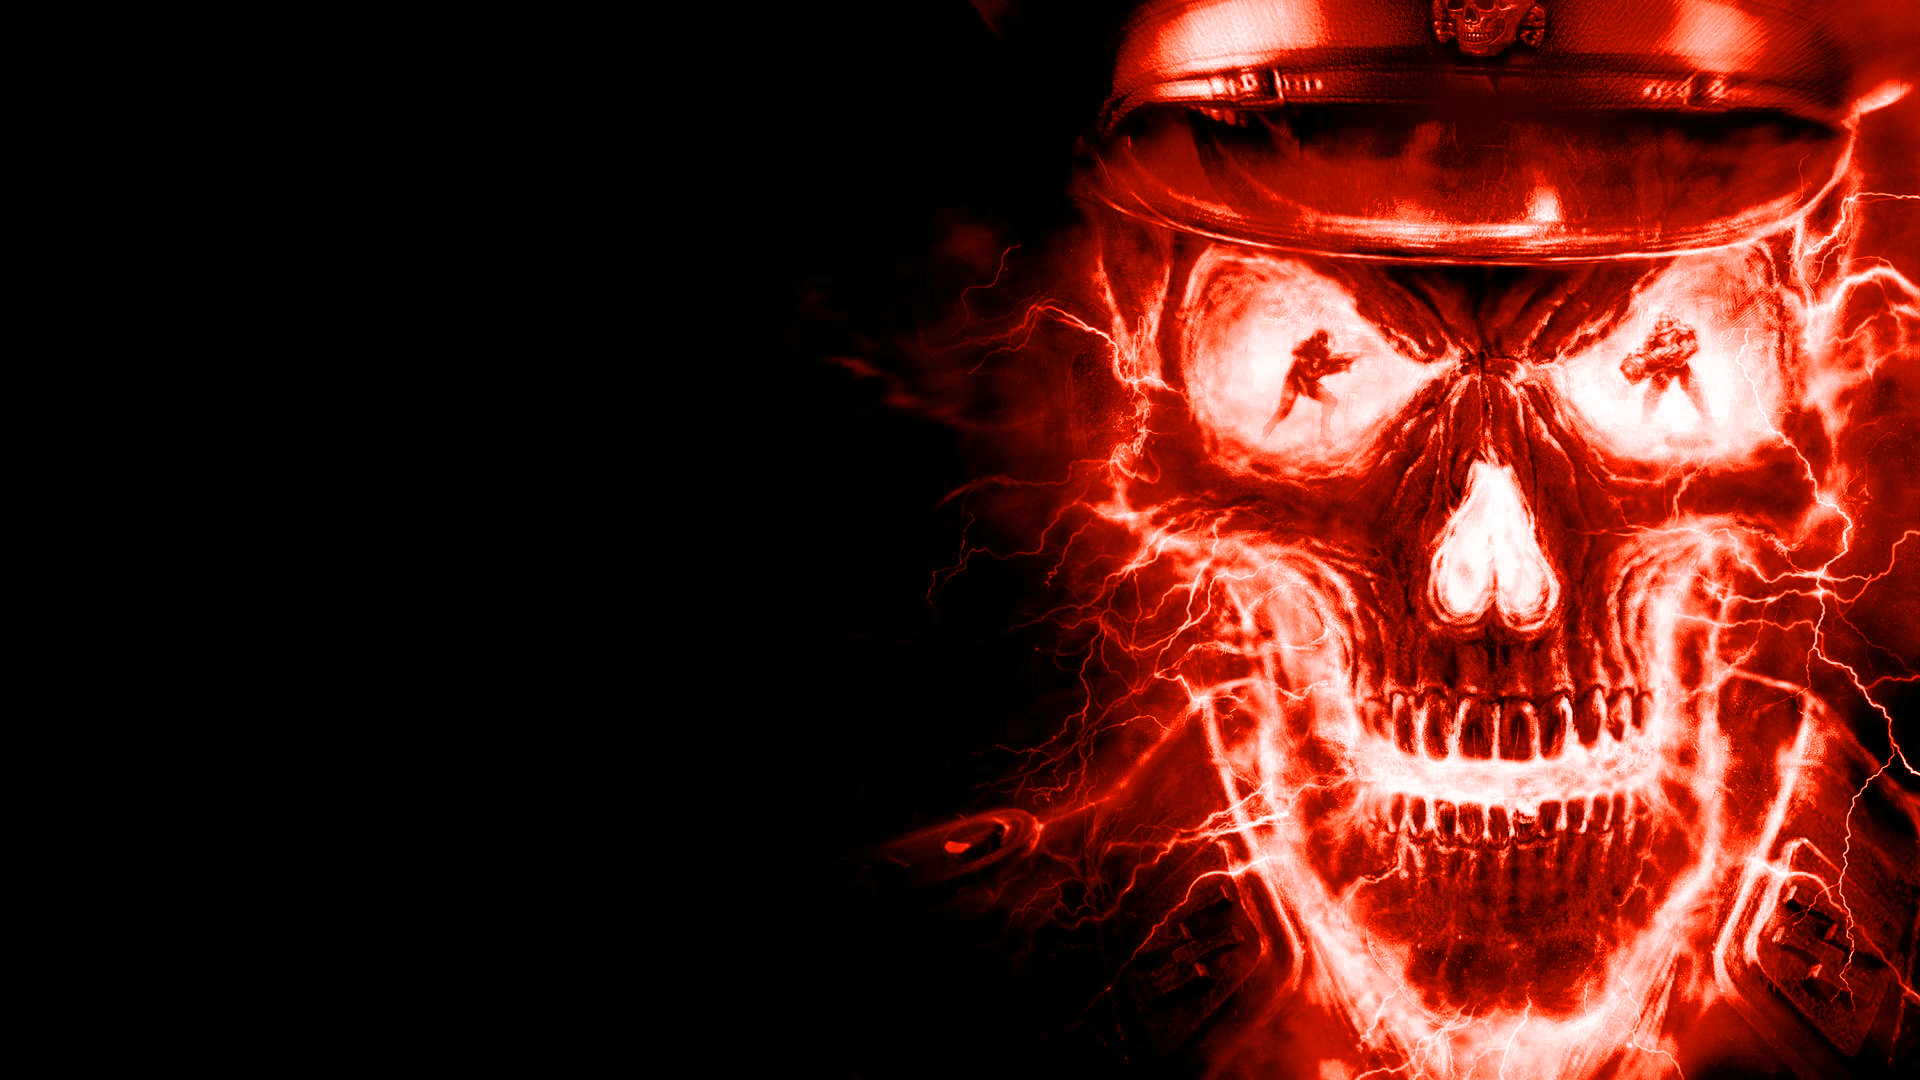 Skull Background Texture Photo Fire